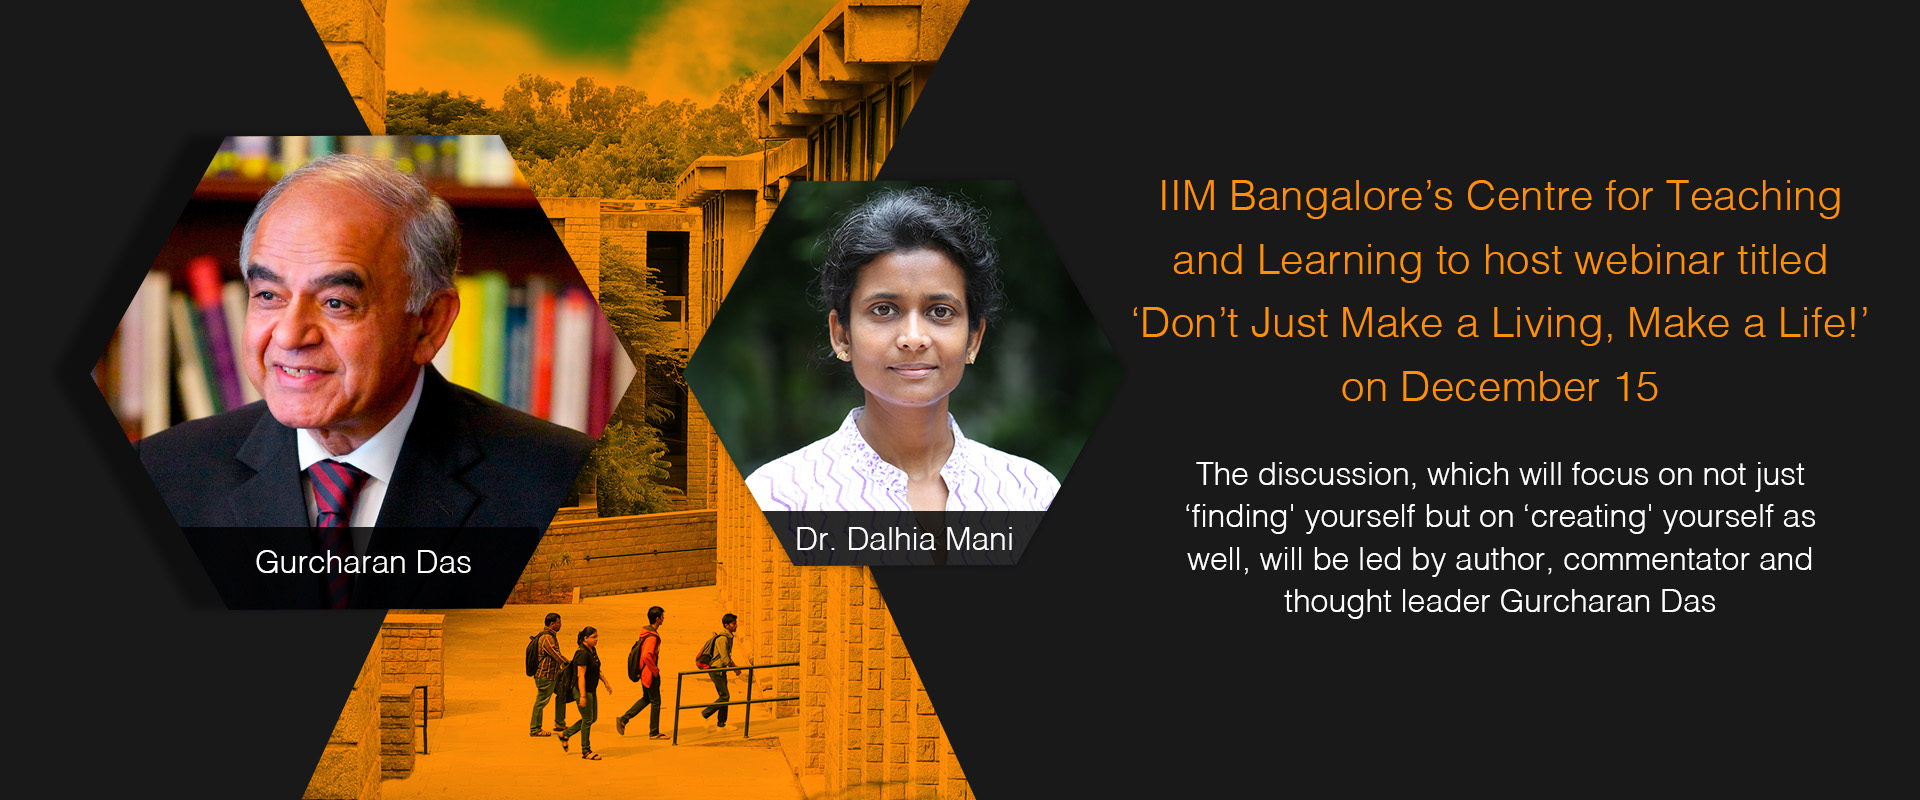 IIM Bangalore’s Centre for Teaching and Learning to host webinar titled ‘Don’t Just Make a Living, Make a Life!’ on December 15